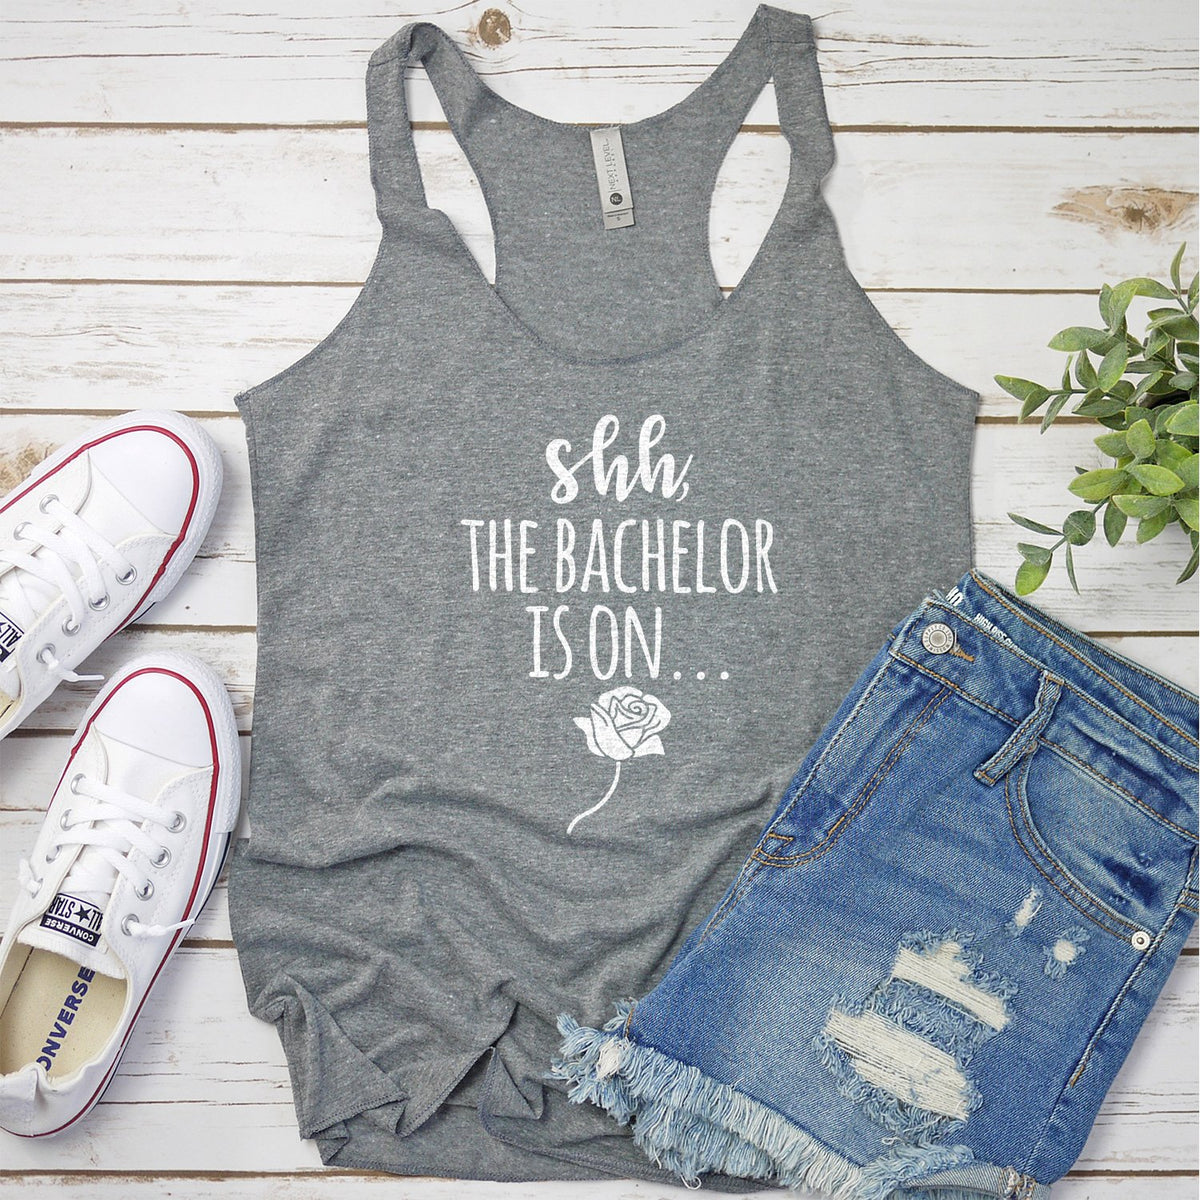 Shh The Bachelor is On - Tank Top Racerback